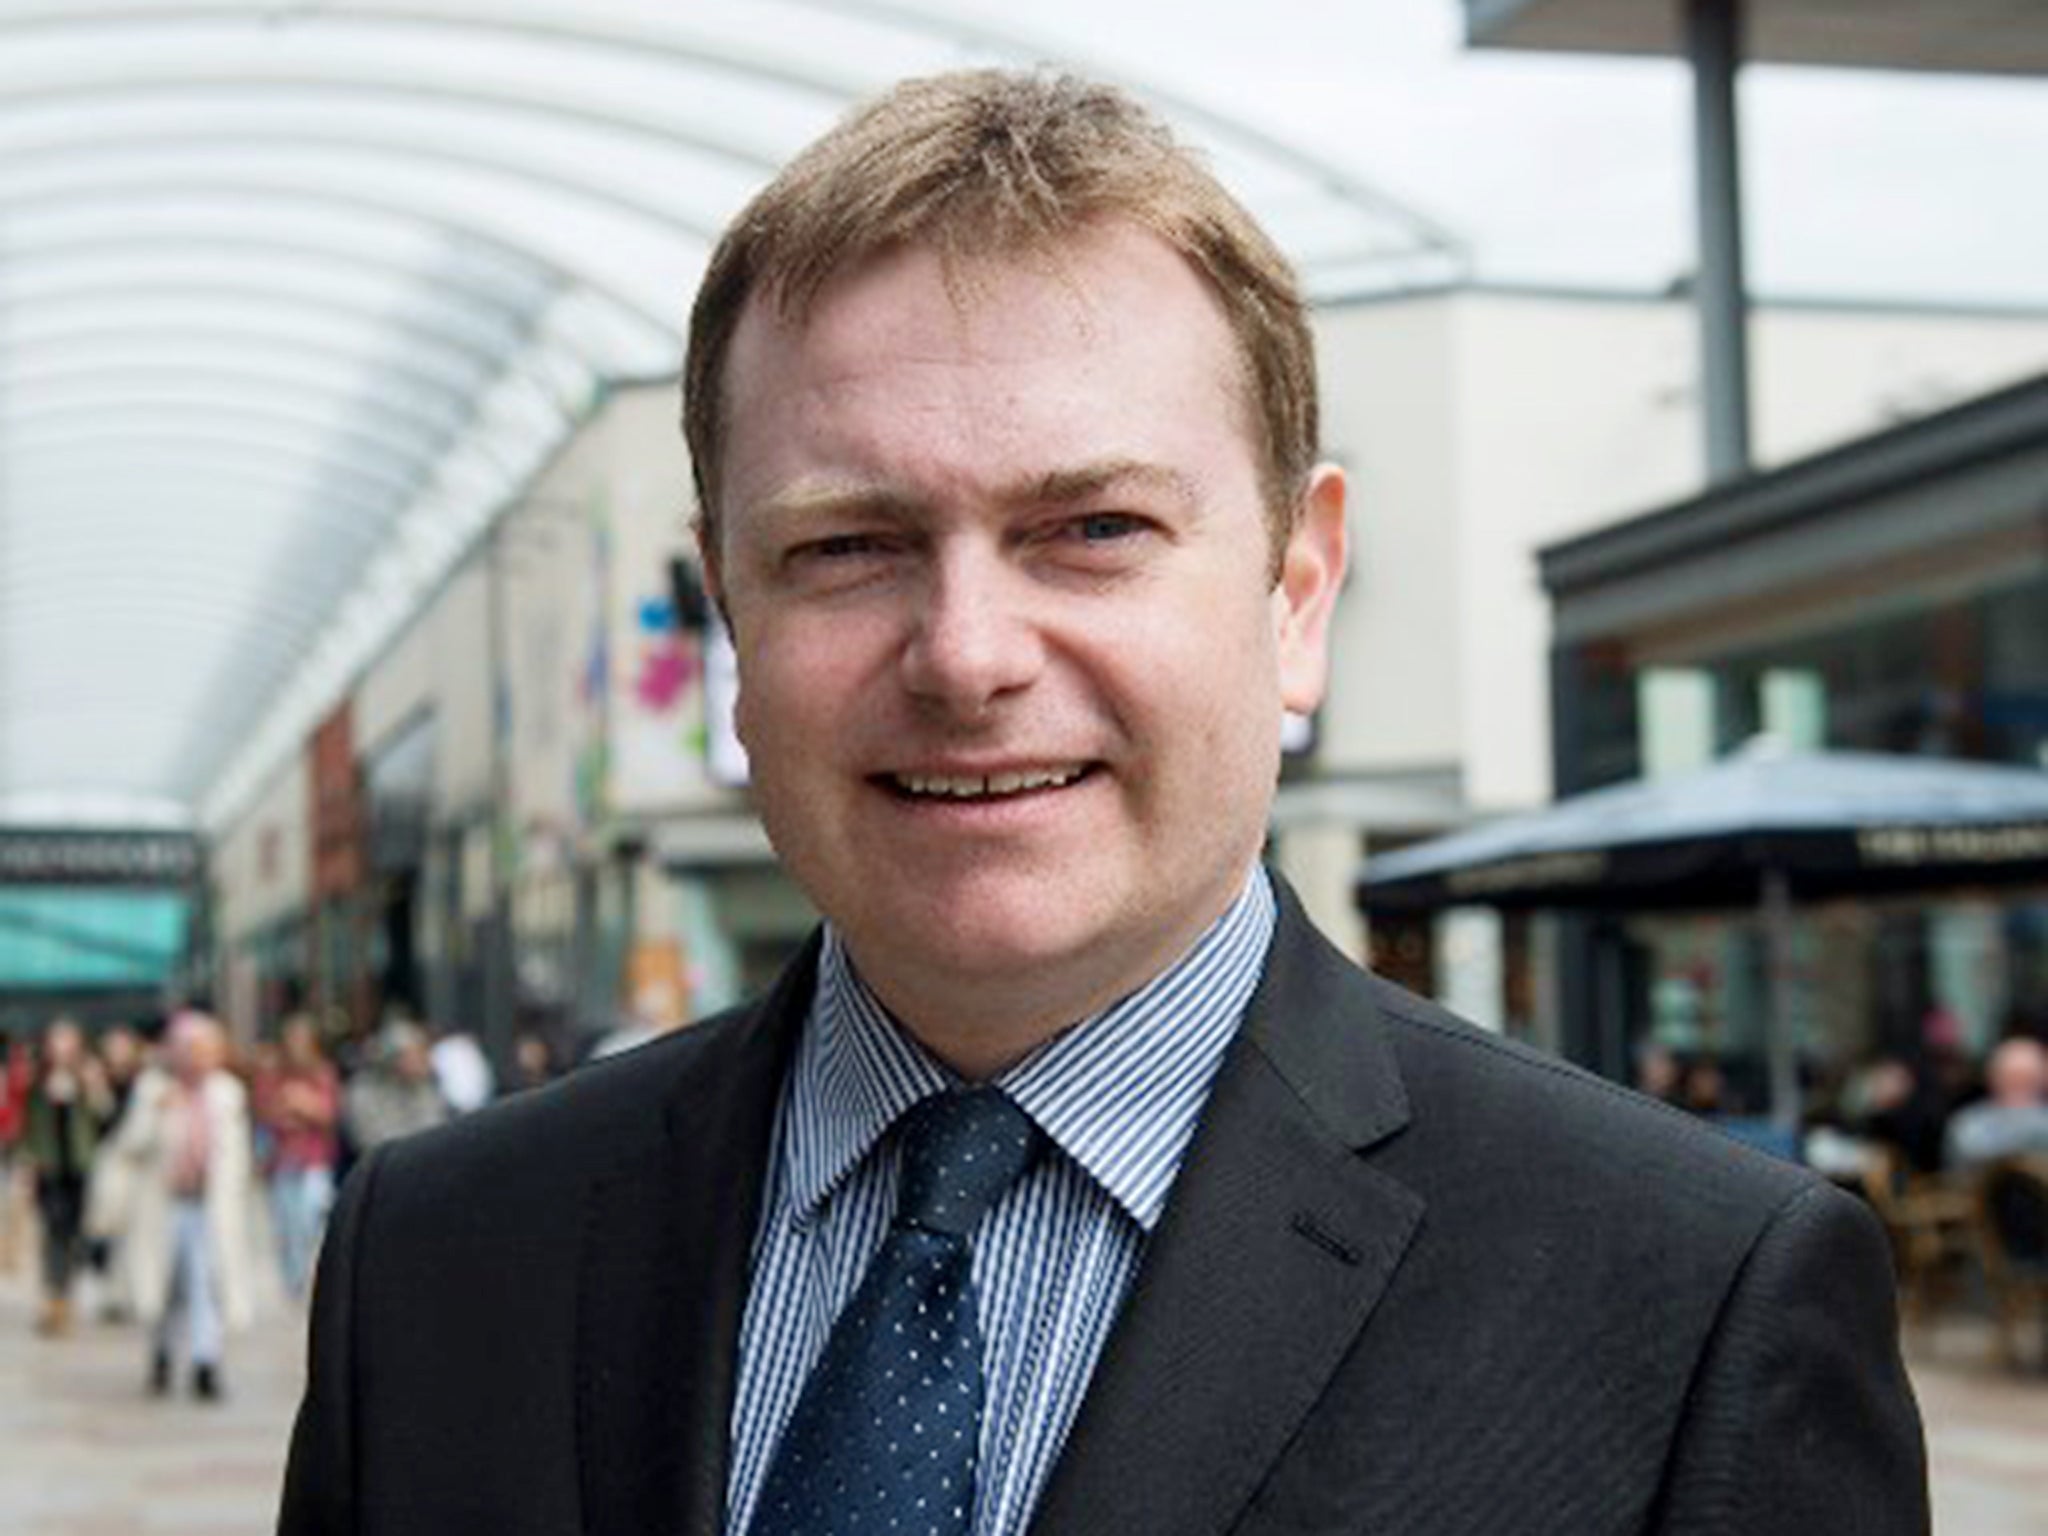 Antony Calvert, the Conservative candidate in Wakefield, criticised a working class man for entering a Costa Coffee